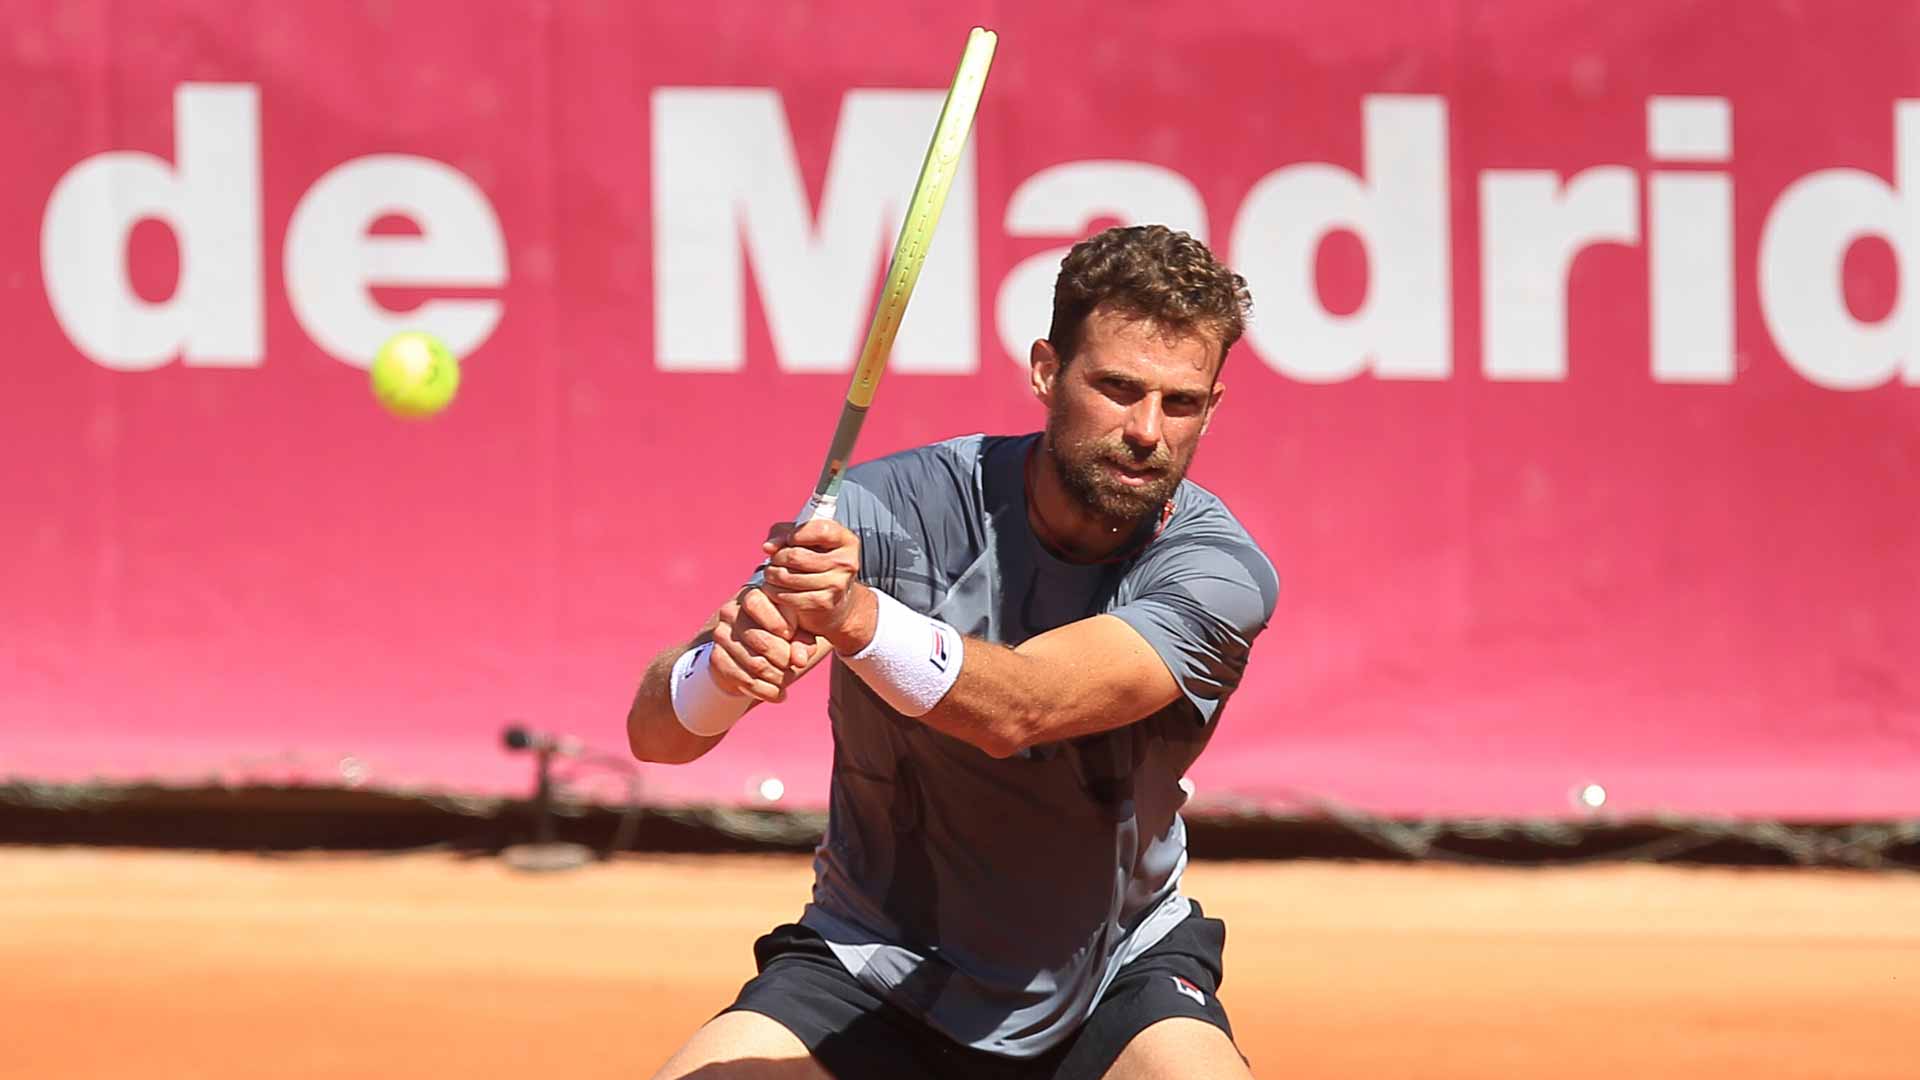 <a href='https://www.atptour.com/en/players/stefano-napolitano/n679/overview'>Stefano Napolitano</a> wins the Madrid Challenger.